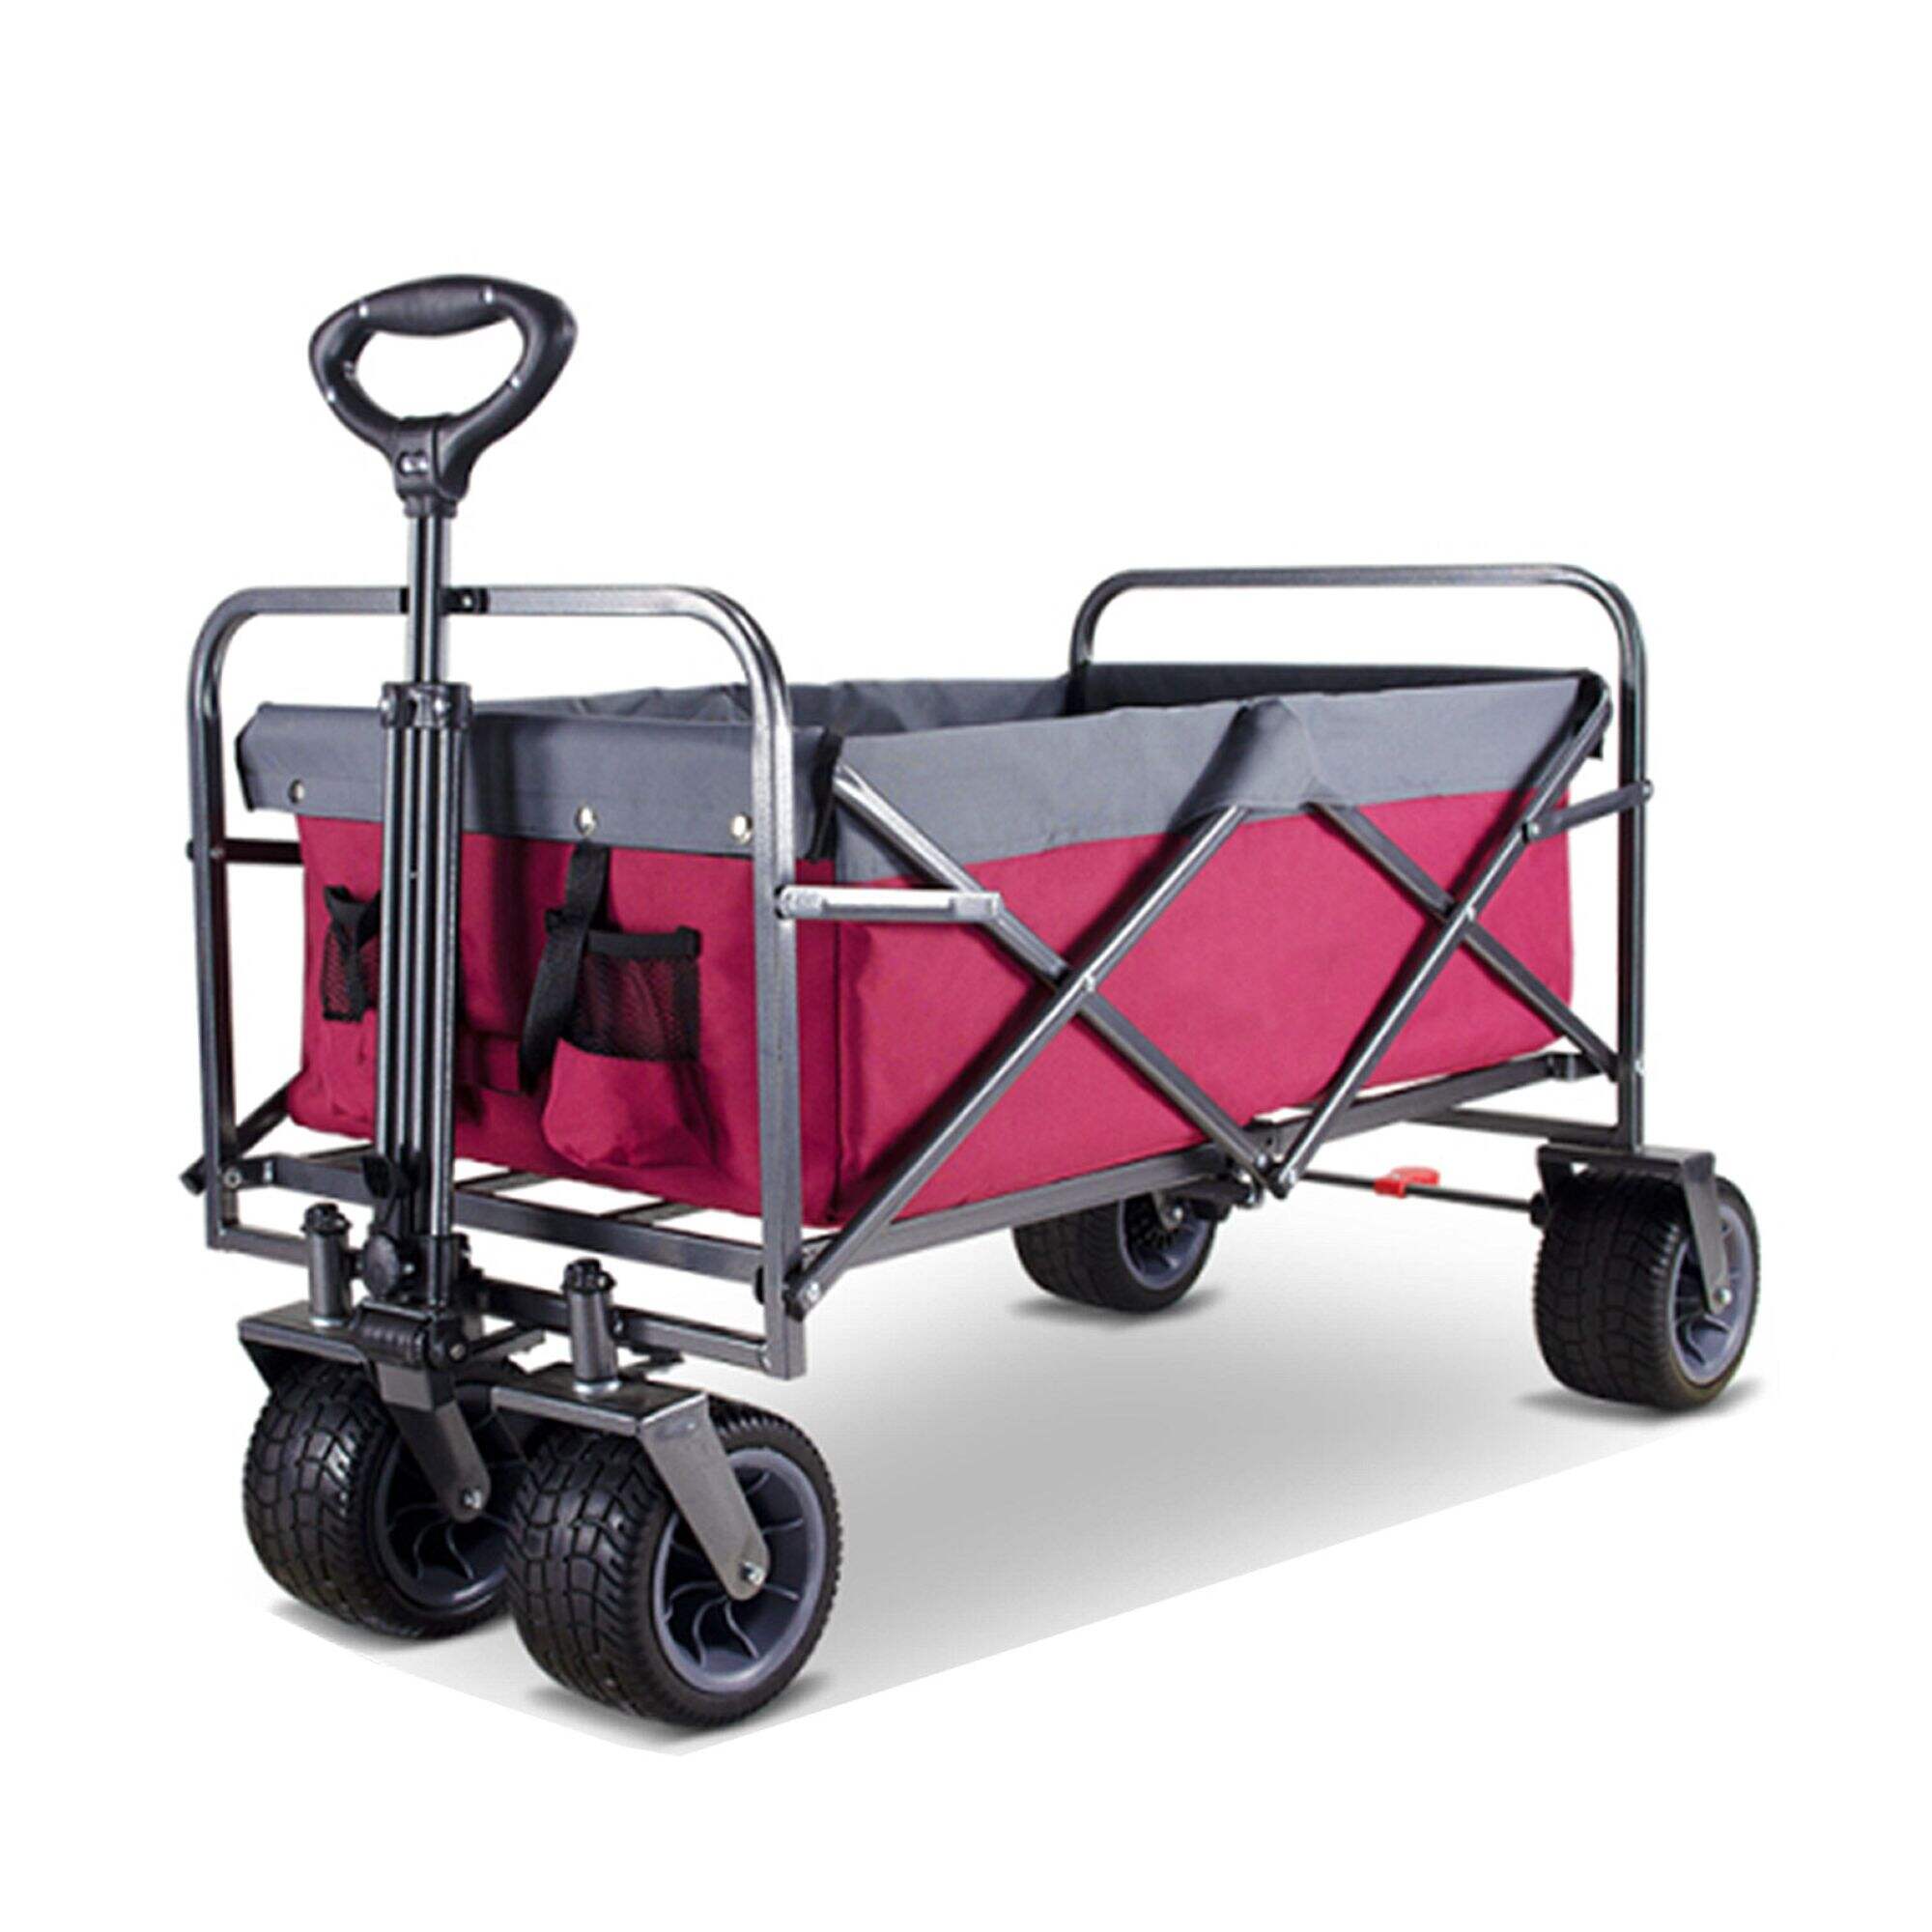 GT2133 Folding Utility Wagon Cart, Collapsible Outdoor Camping Wagon, for Beach Sand Sports Shopping, with 7x4inch PU Foam Wheel